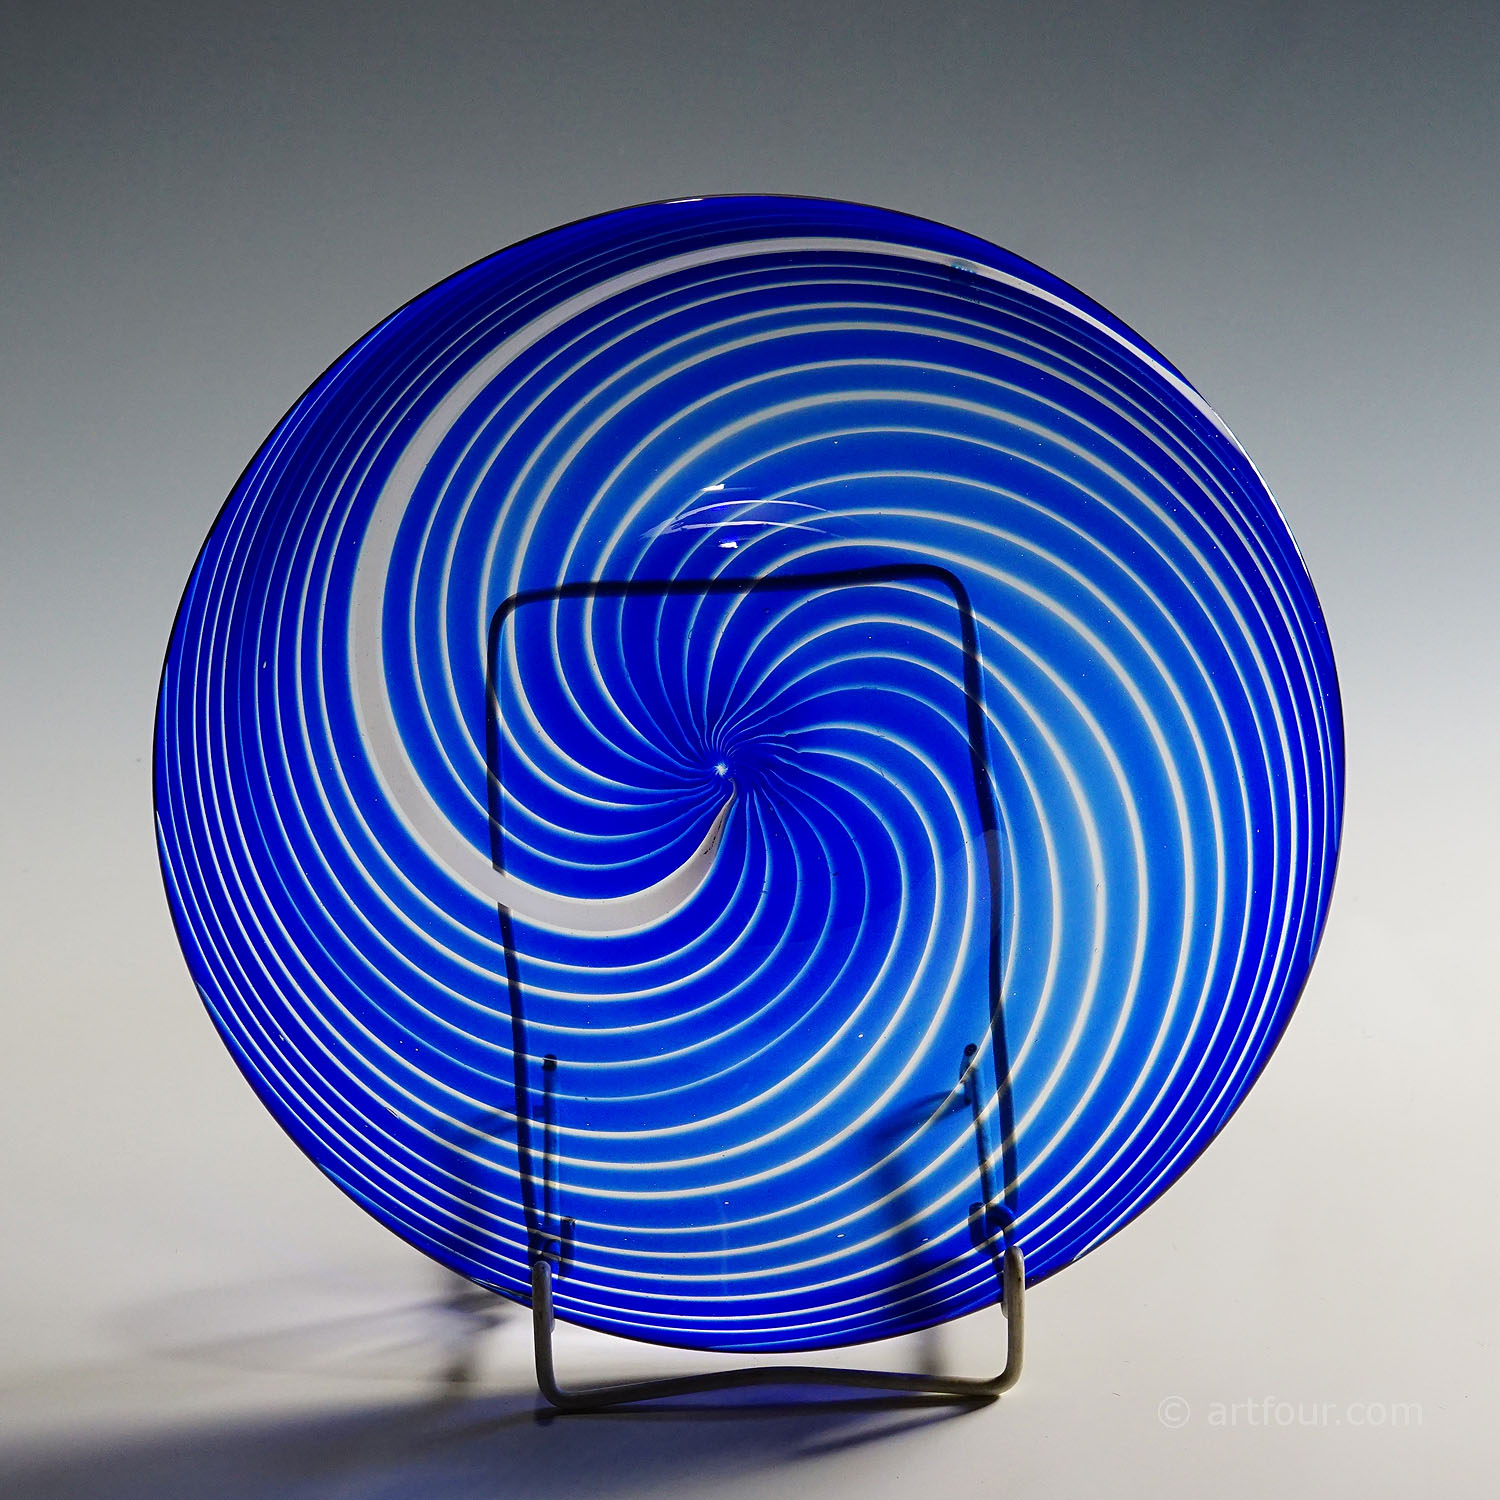 Large Filigree Glass Plate by Tarmo Maaronen for Bianco Blu, Fiscars Finland